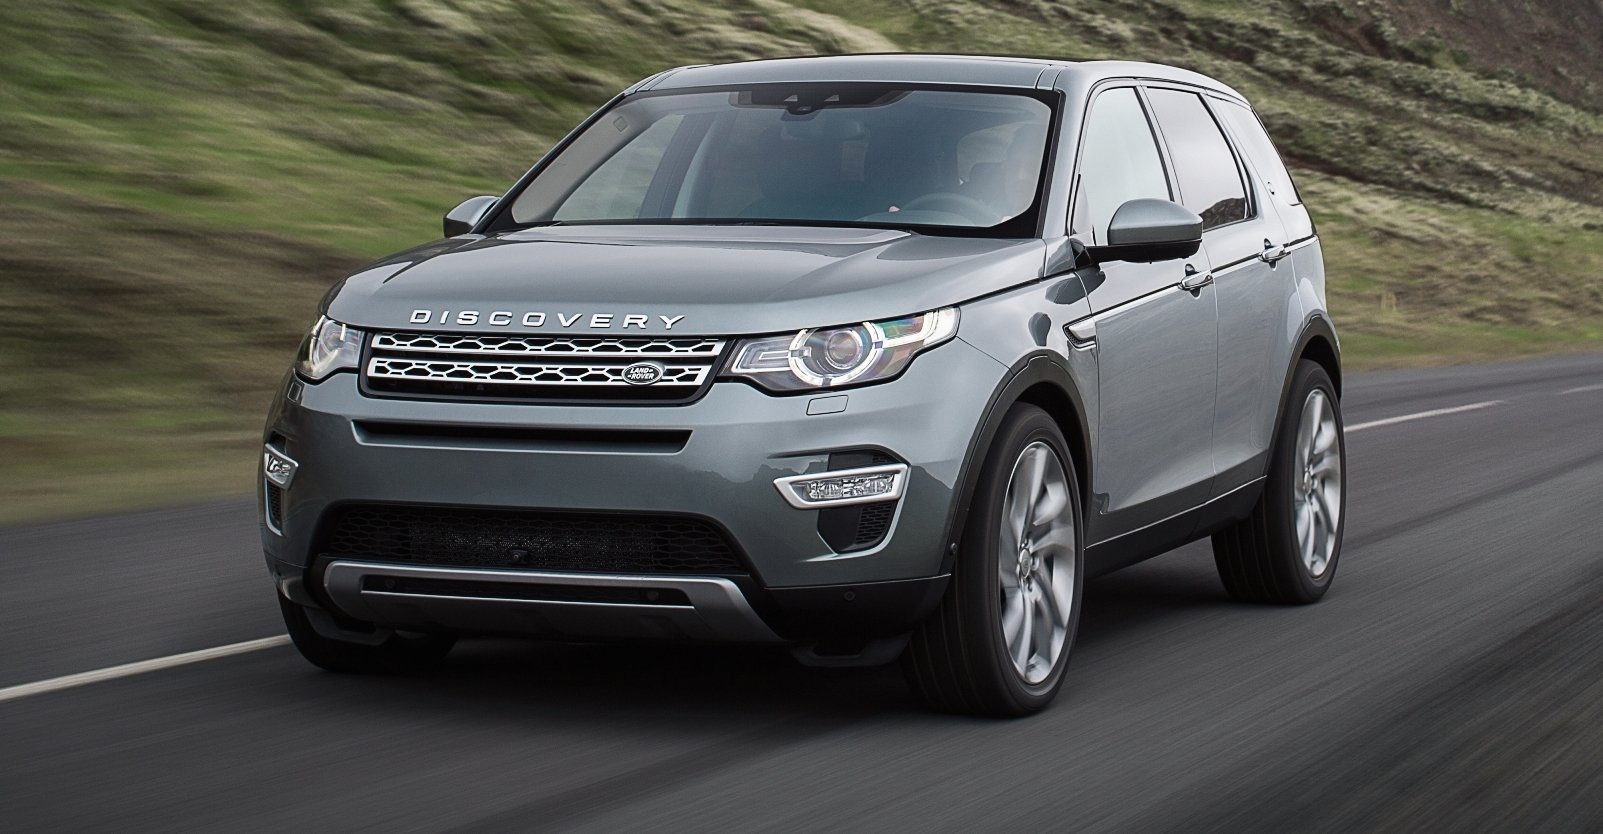 2015 Land Rover Discovery Sport revealed Photos (1 of 14)